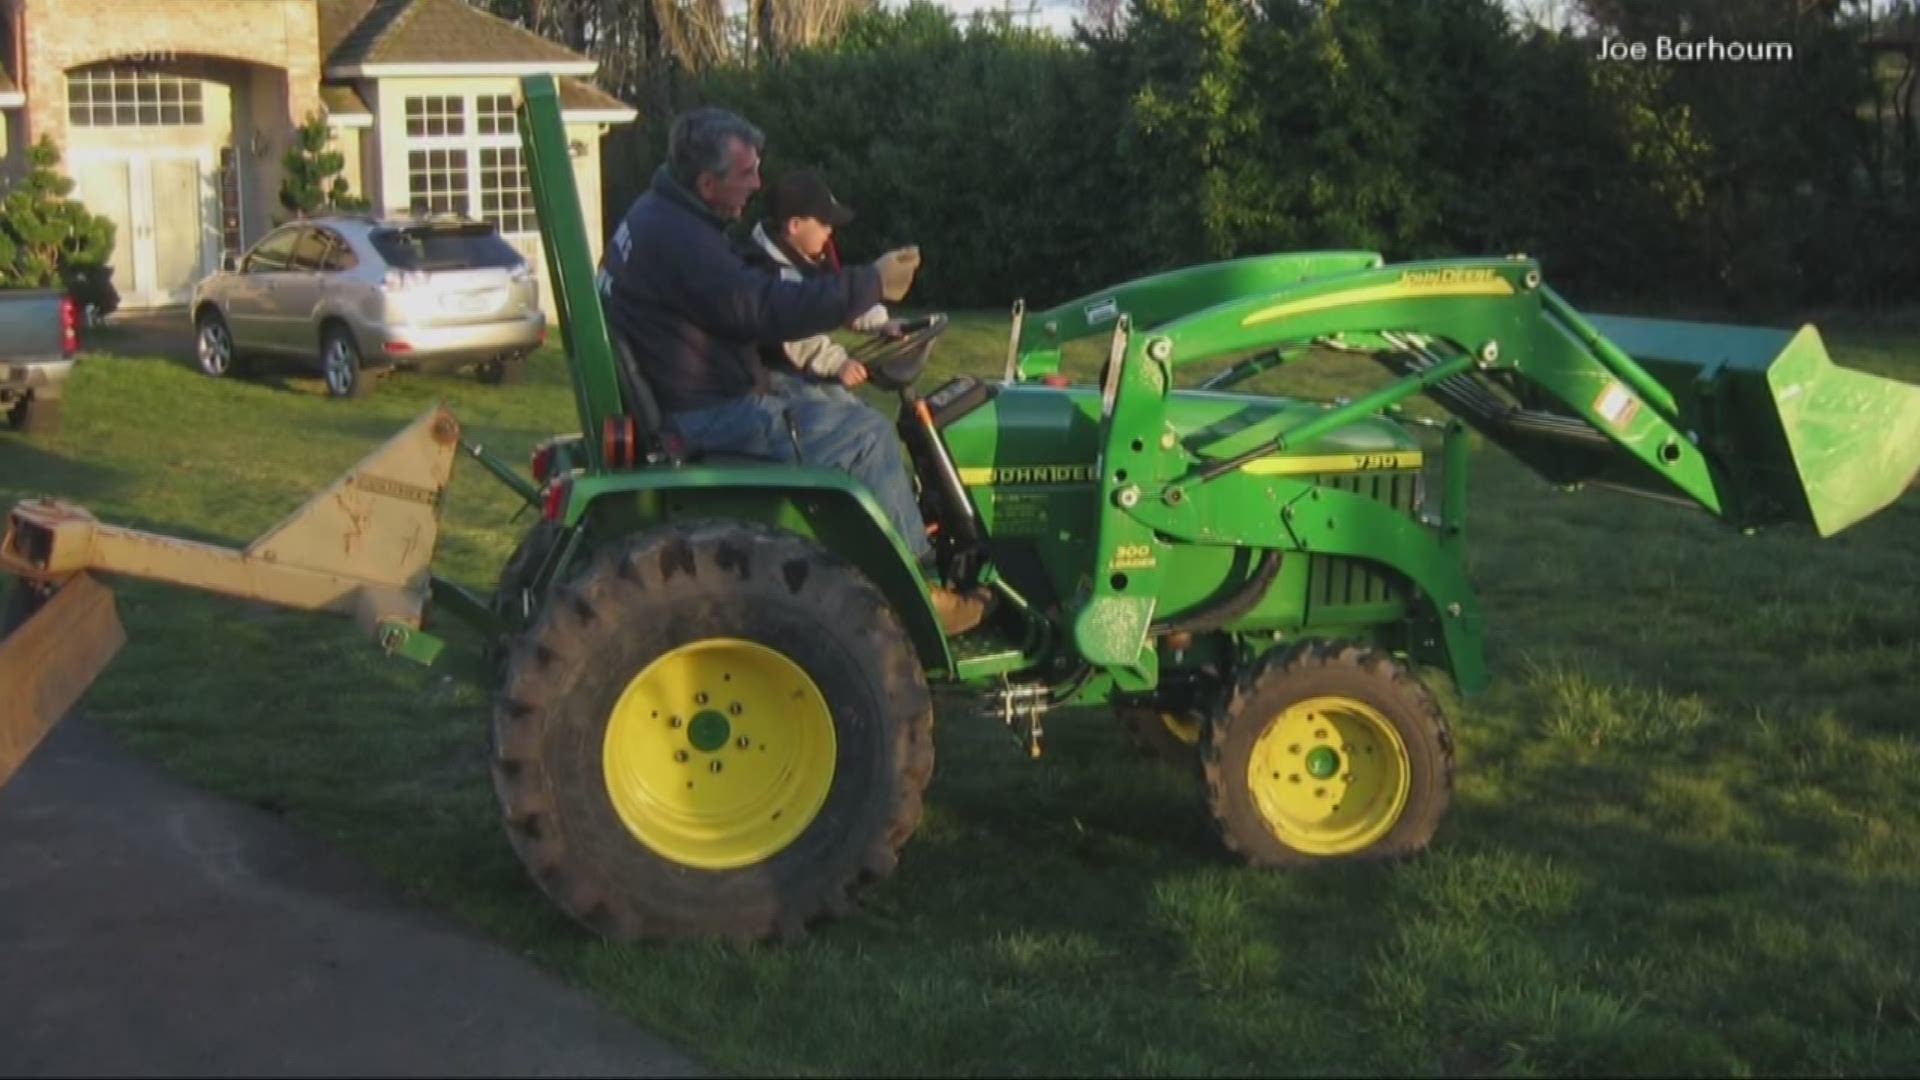 Happy Valley family wants stolen family tractor back